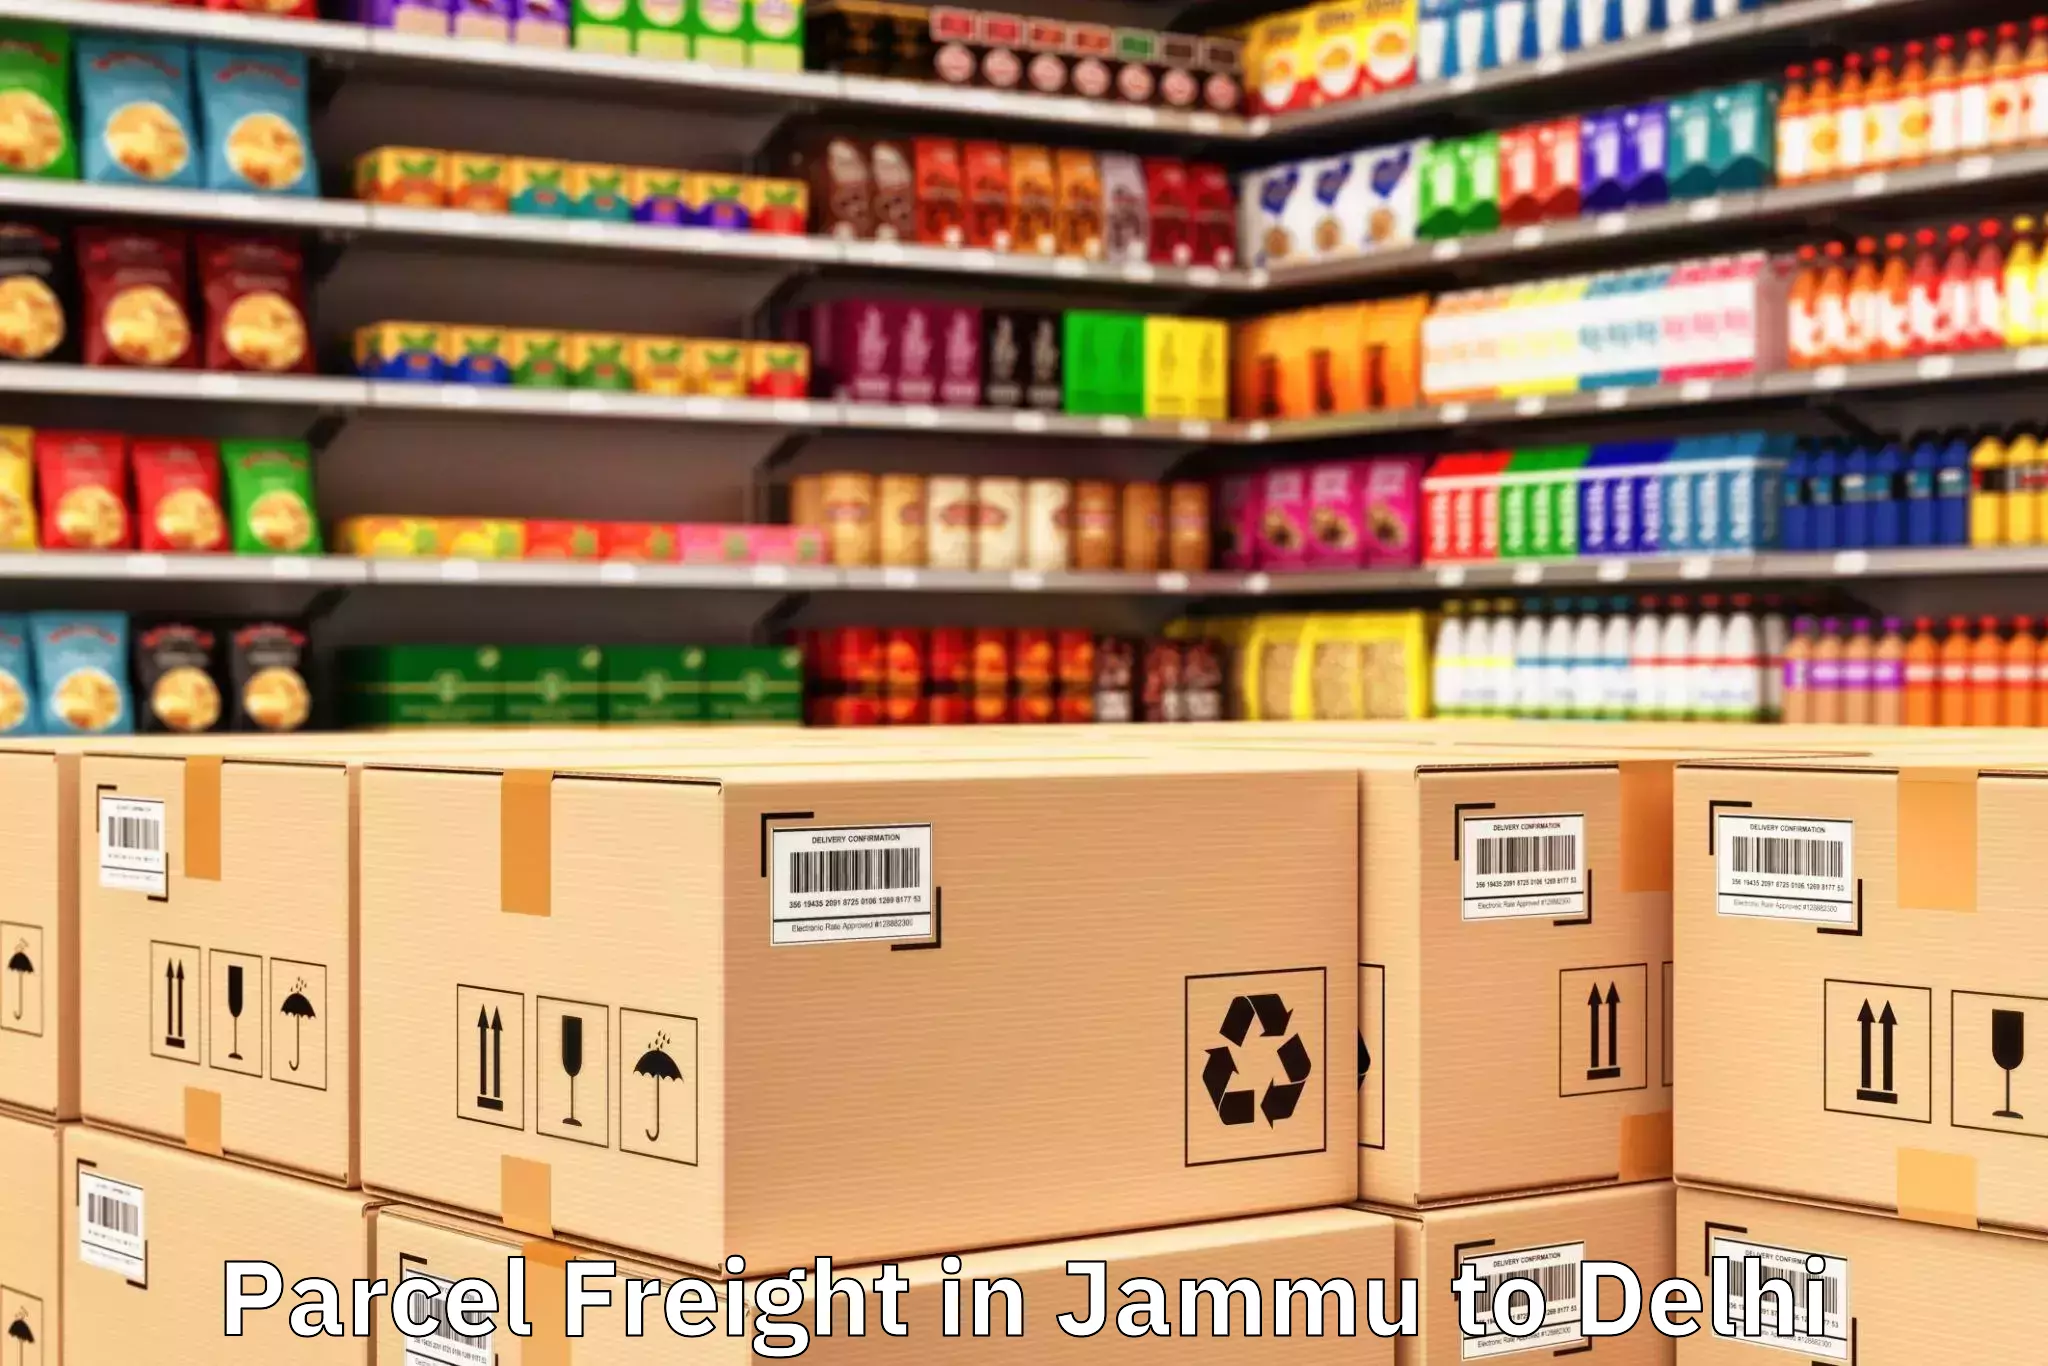 Top Jammu to Unity One Janakpuri Mall Parcel Freight Available